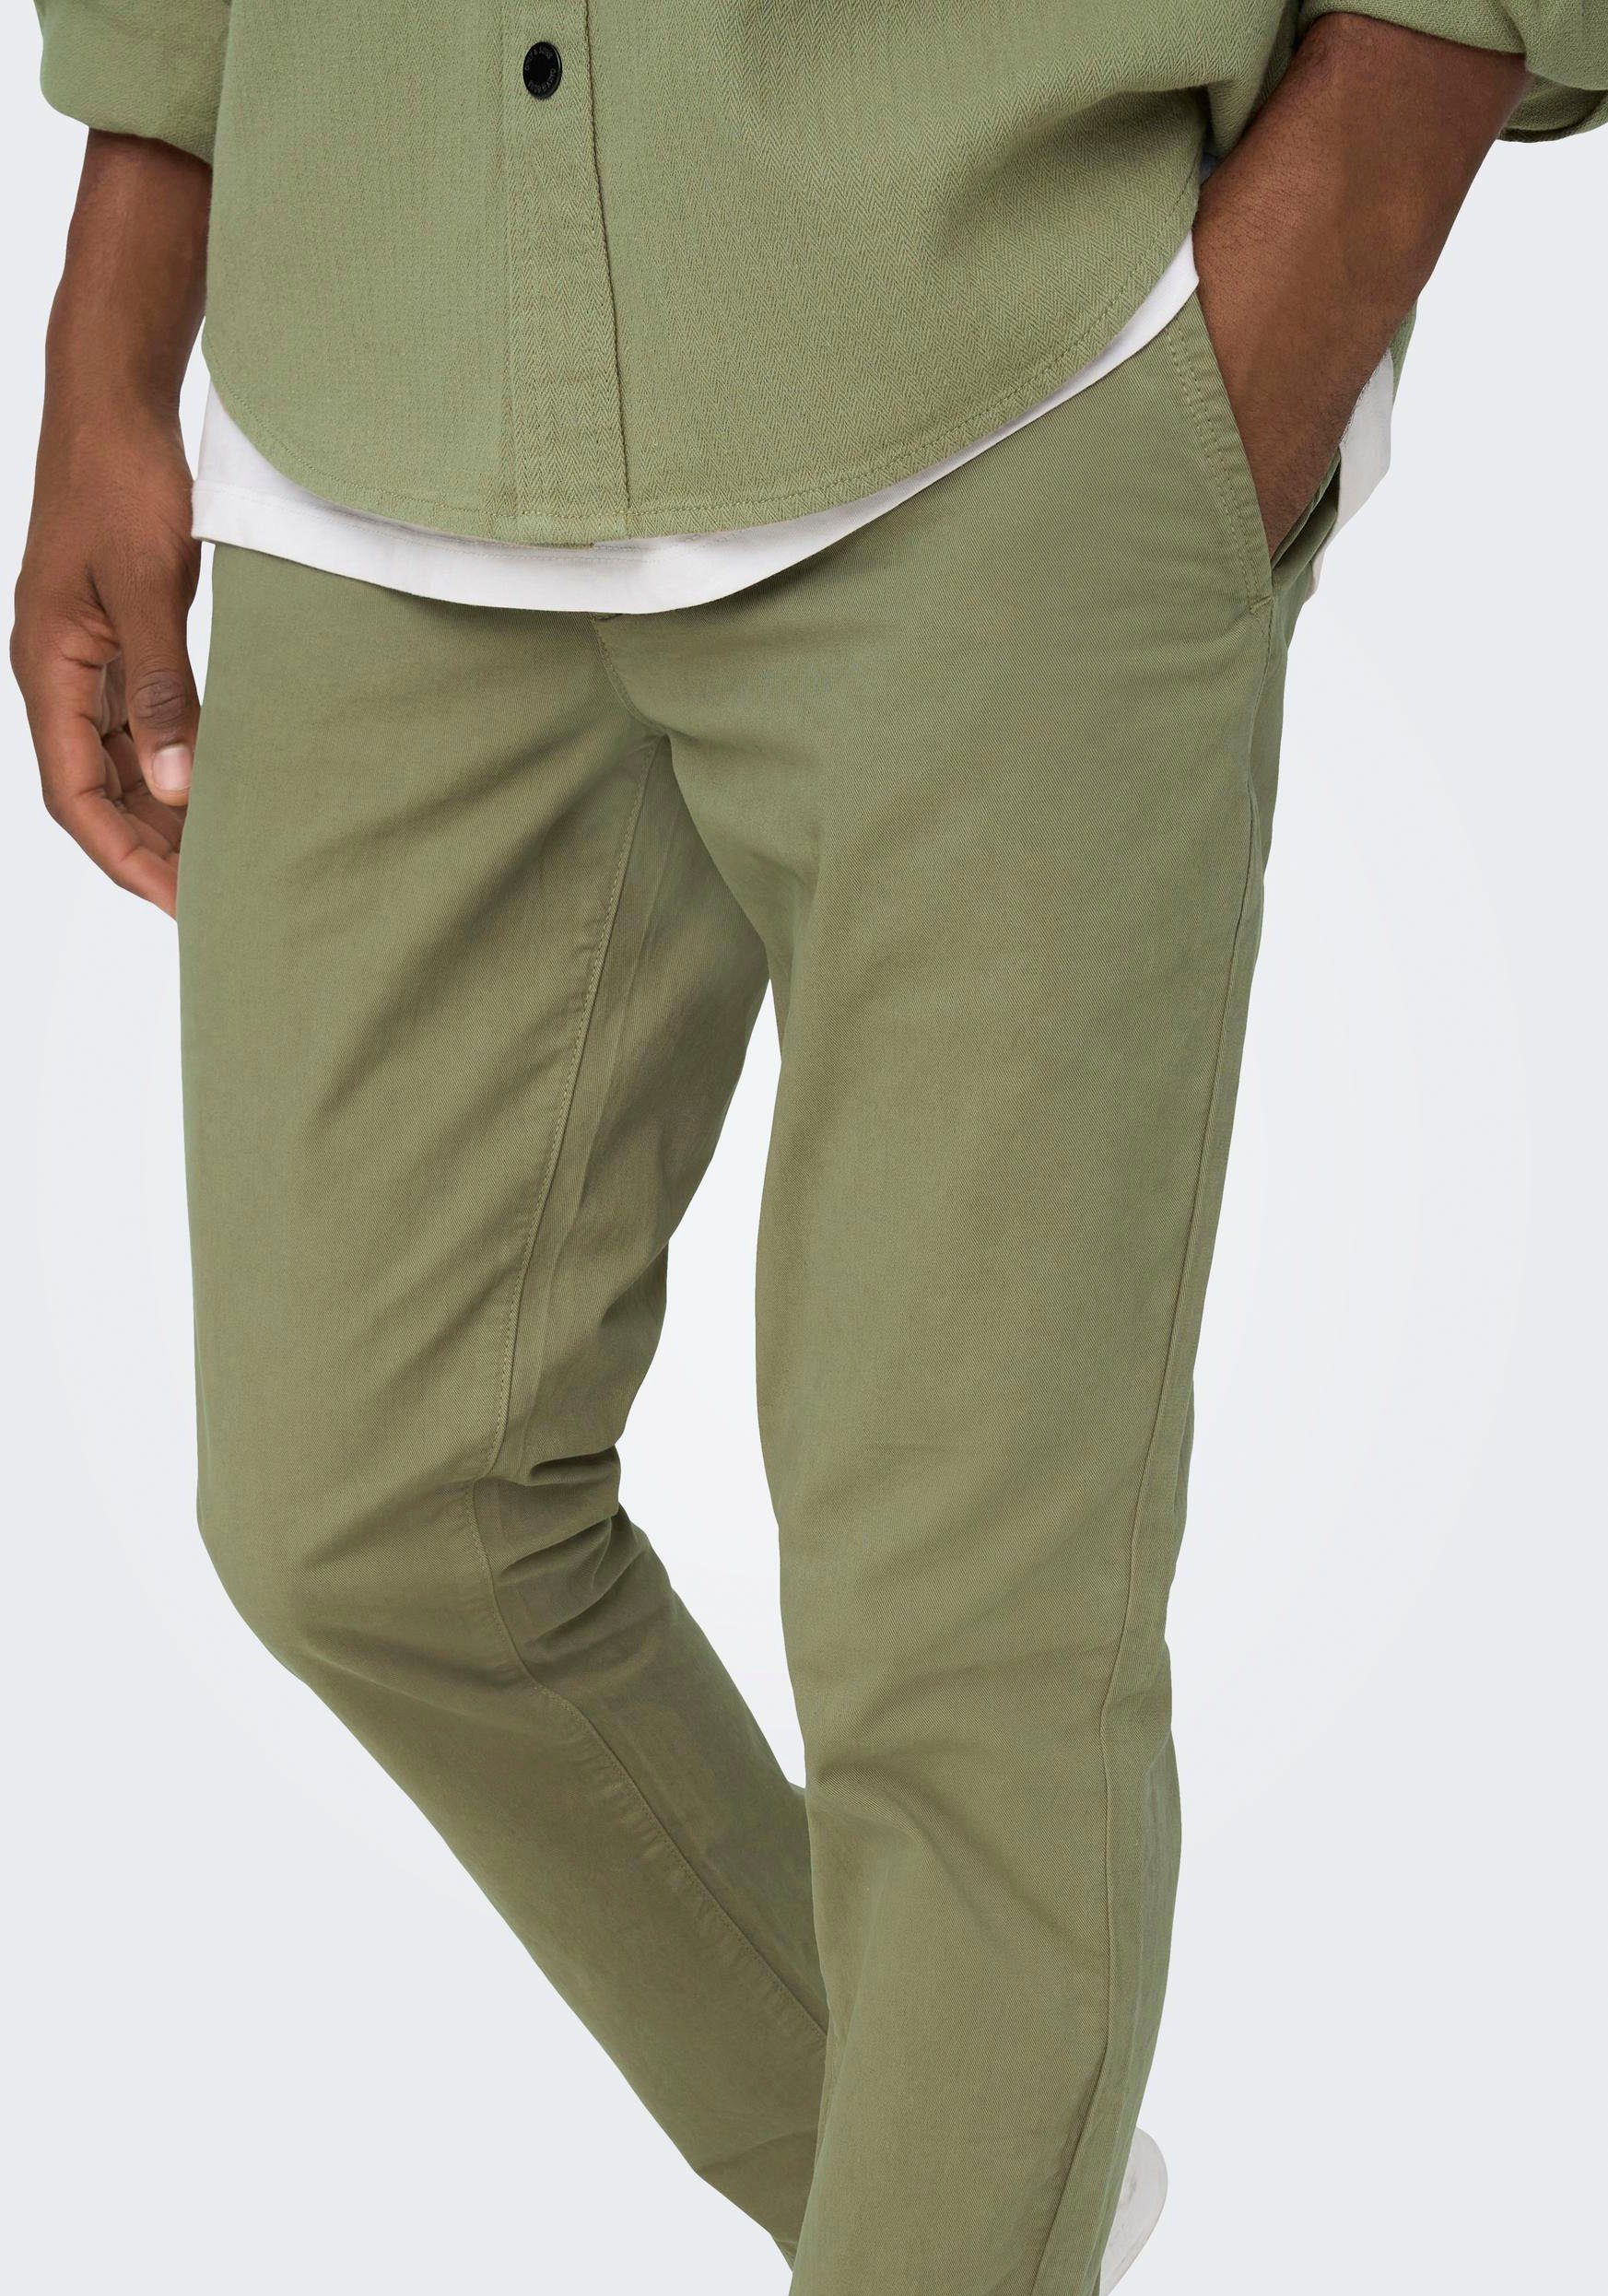 ONLY & SONS Chinohose im mermaid 4-Pocket-Style